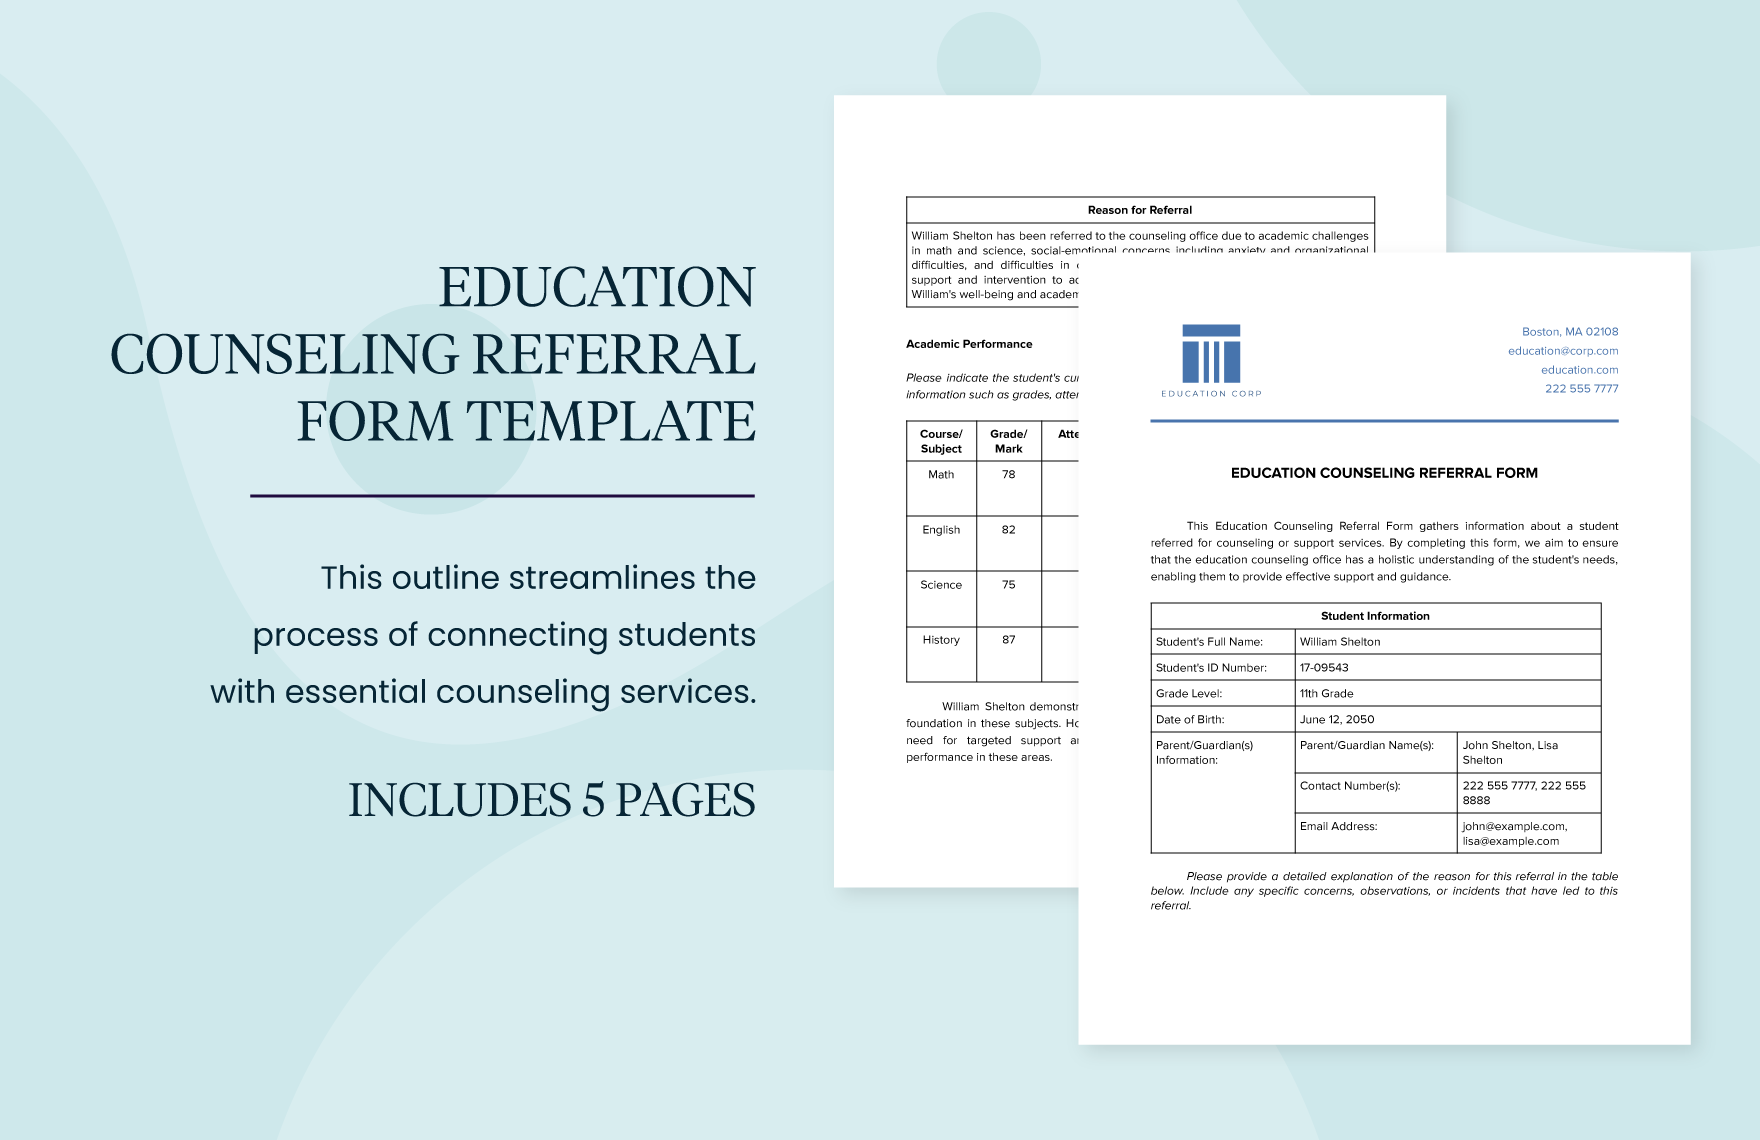 Education Counseling Referral Form Template in Word, Google Docs, PDF